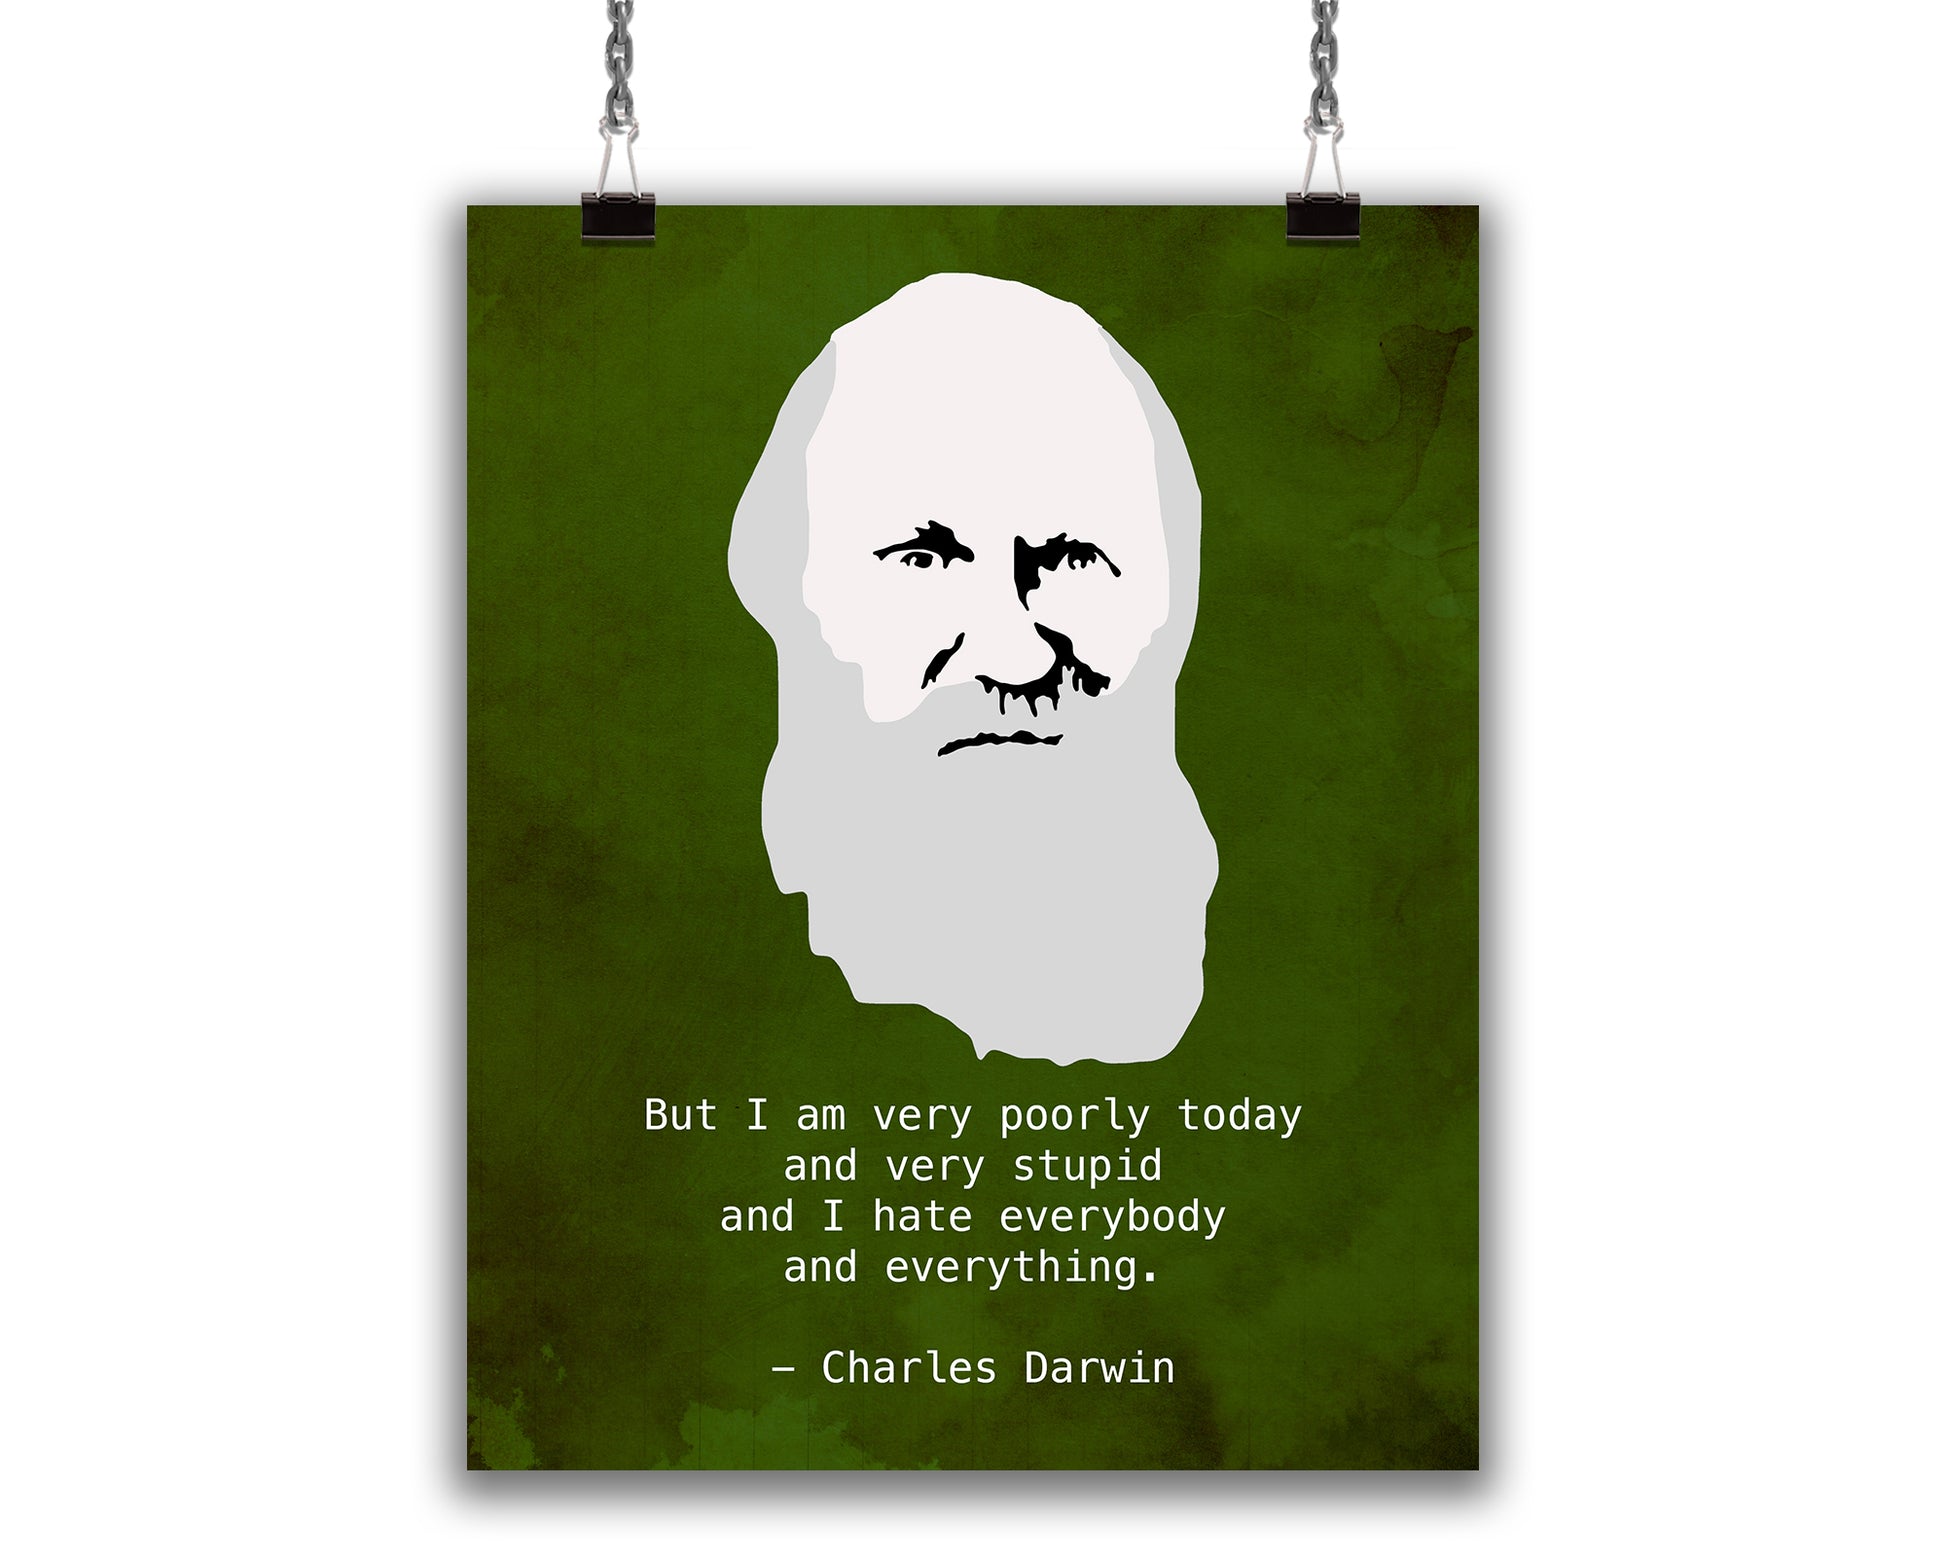 Art Print with a minimalist portrait of scientist Charles Darwin and his hilarious grumpy quote, "But I am very poorly today, and very stupid, and I hate everybody and everything." 